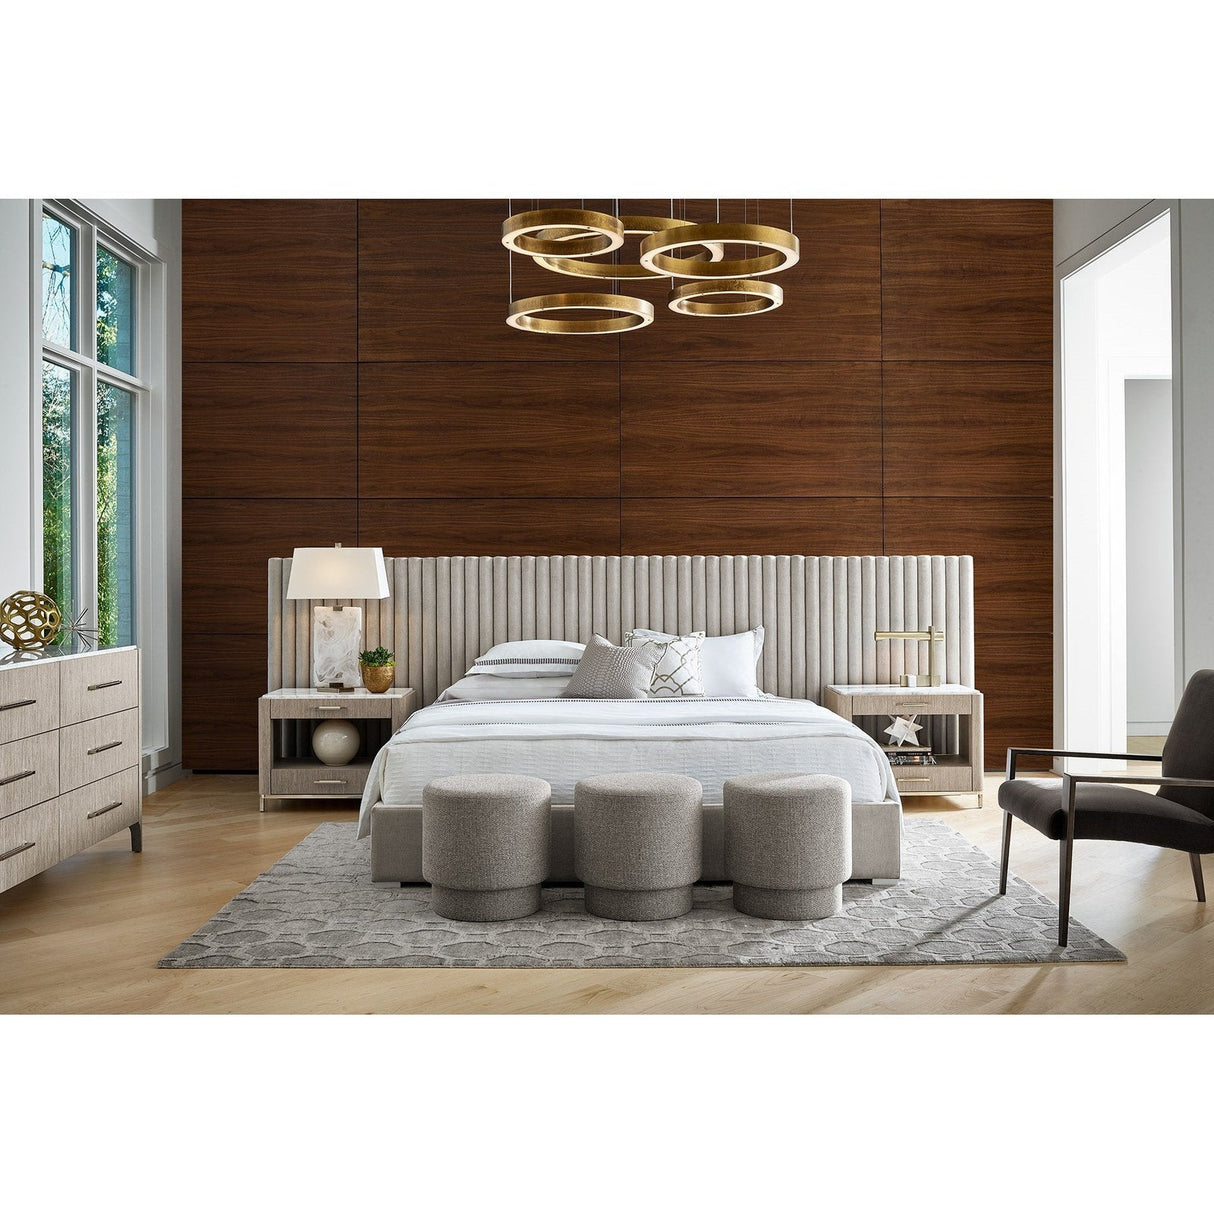 Universal Furniture Modern Decker Wall Bed With Panels